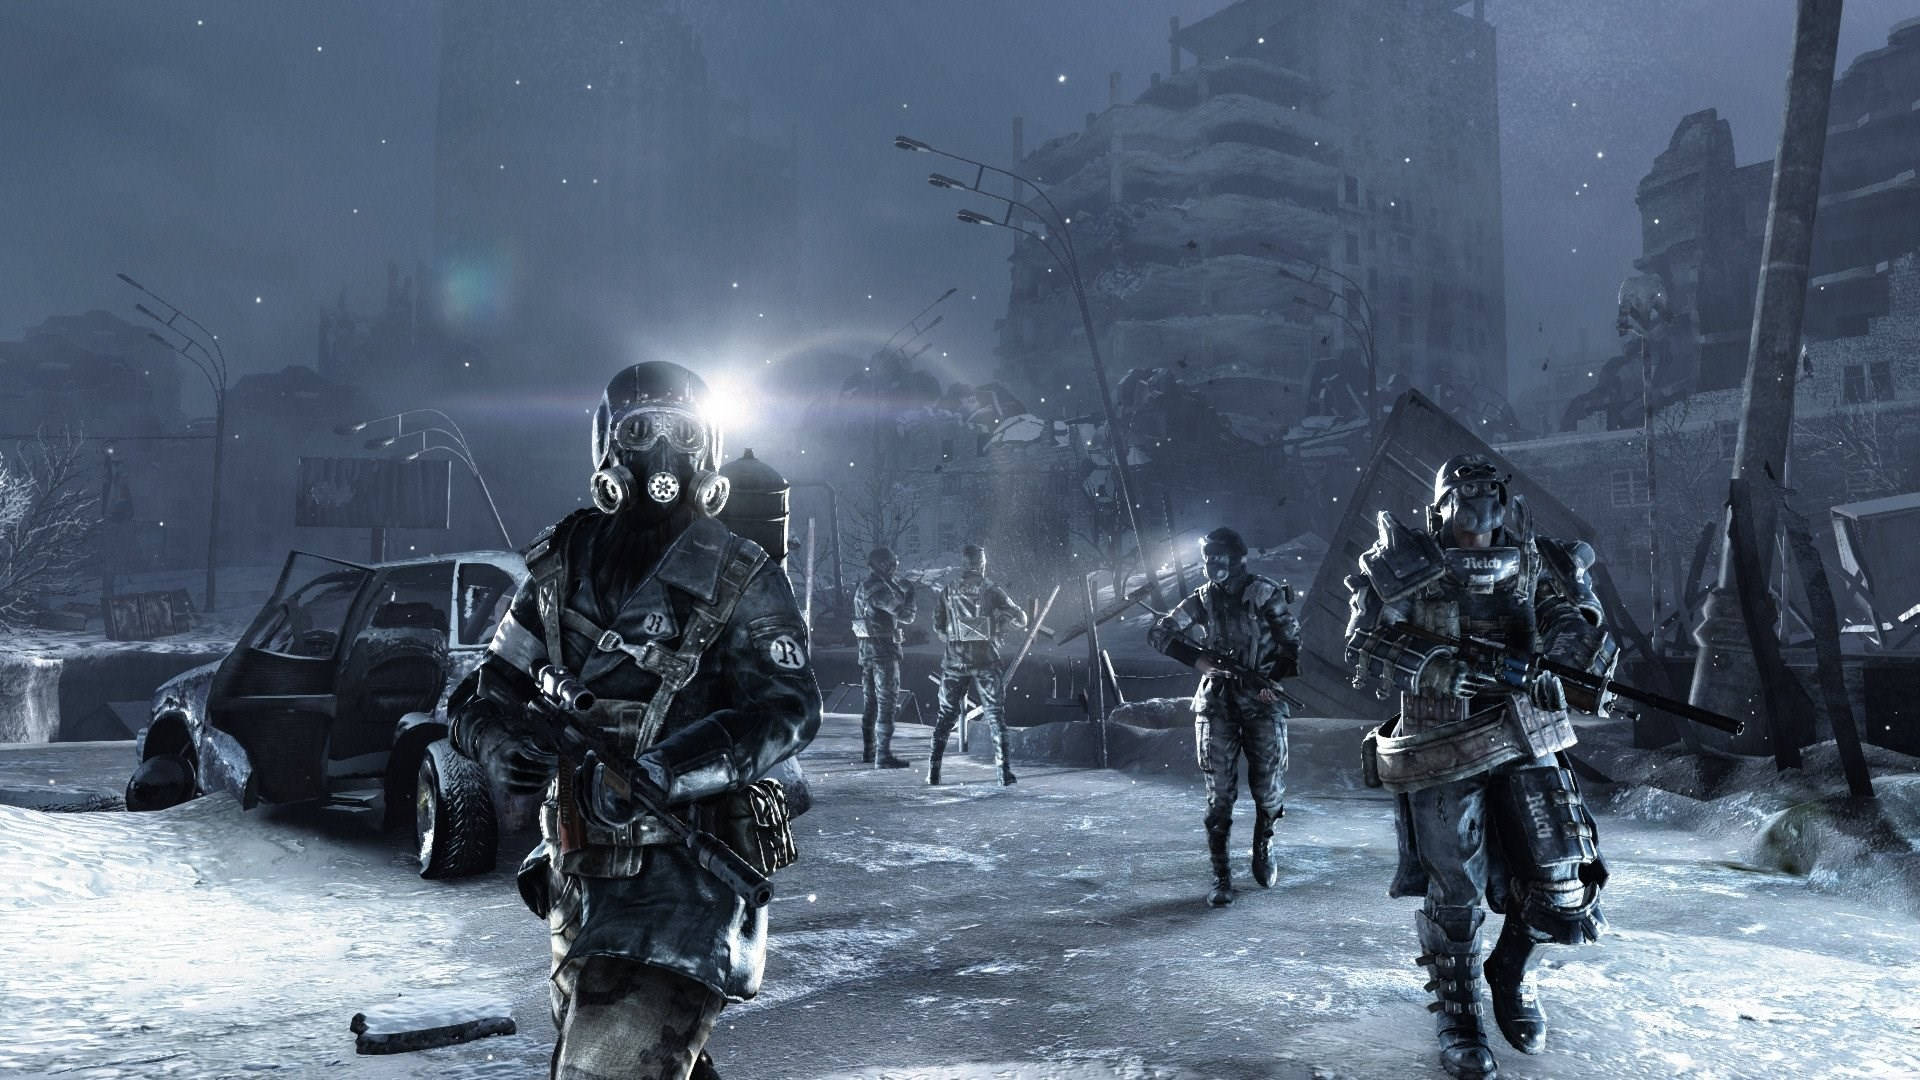 A Group Of Soldiers Walking In The Snow Wallpaper